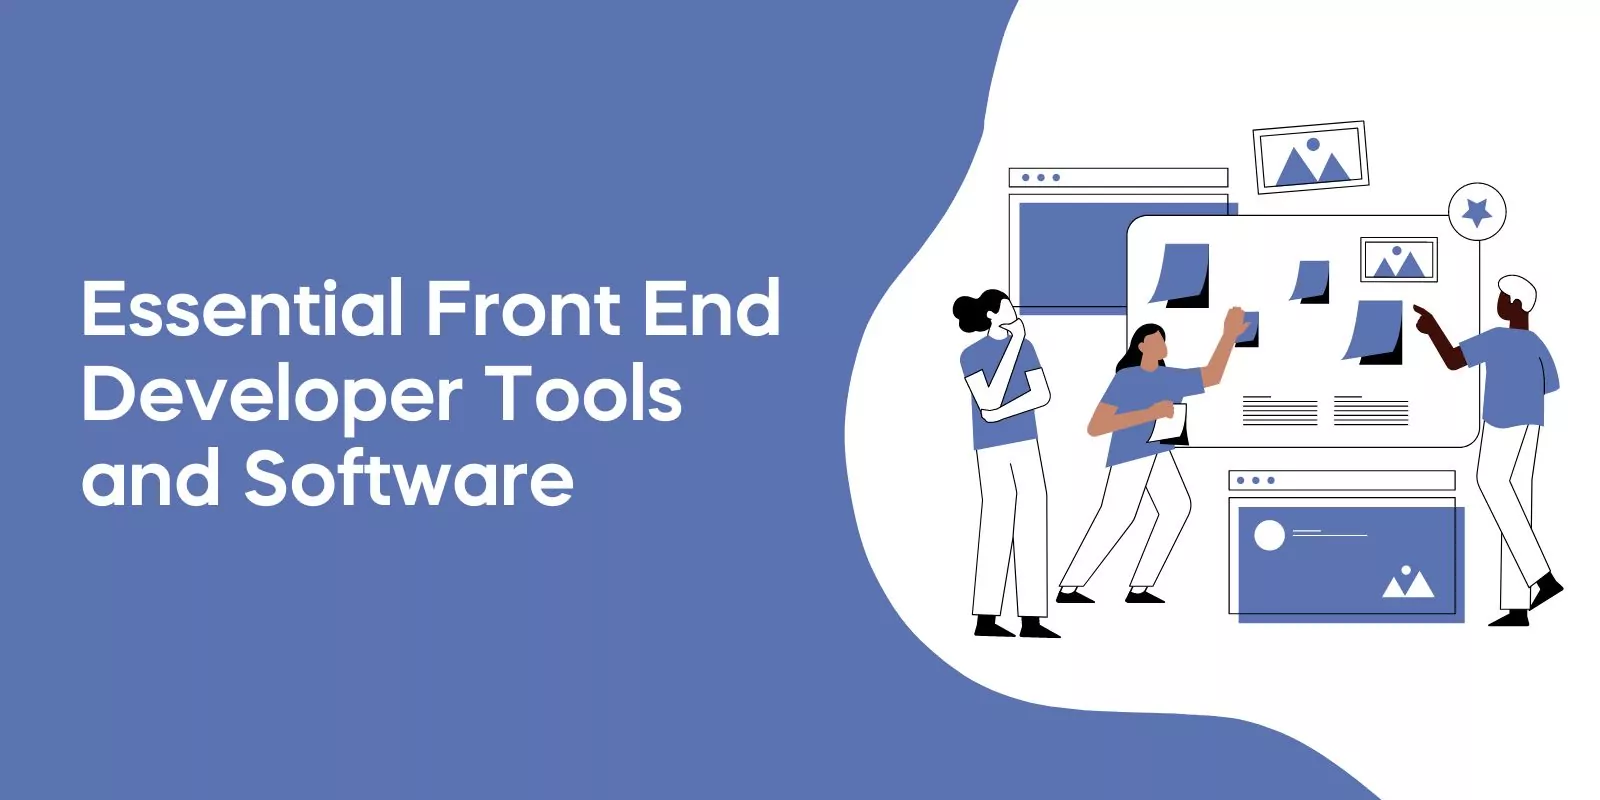 Essential Front End Developer Tools and Software